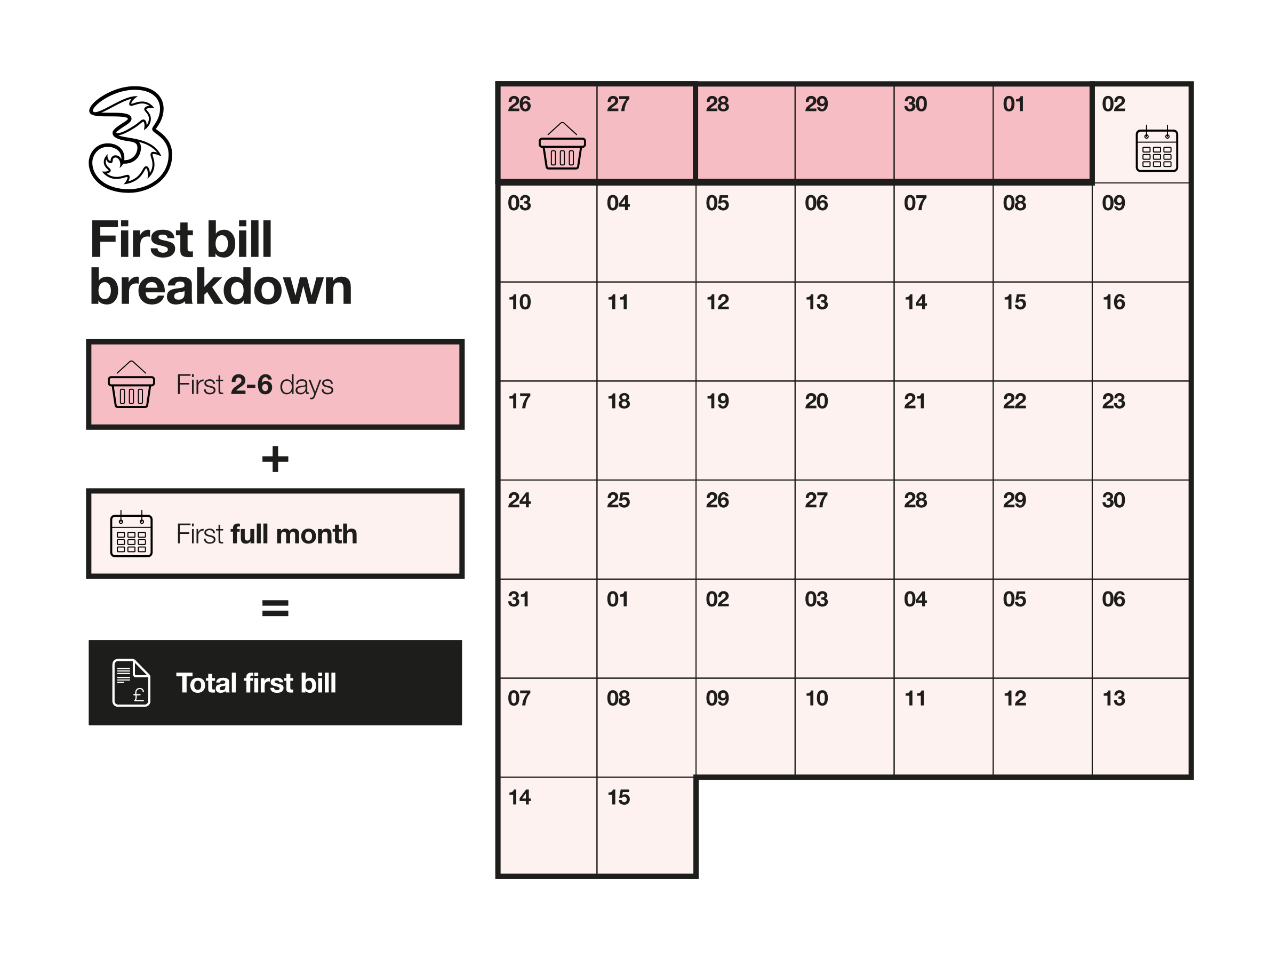 Calendar shows dates from 26th to 15th. First bill shows first 2 to 6 days in pink and full month in beige